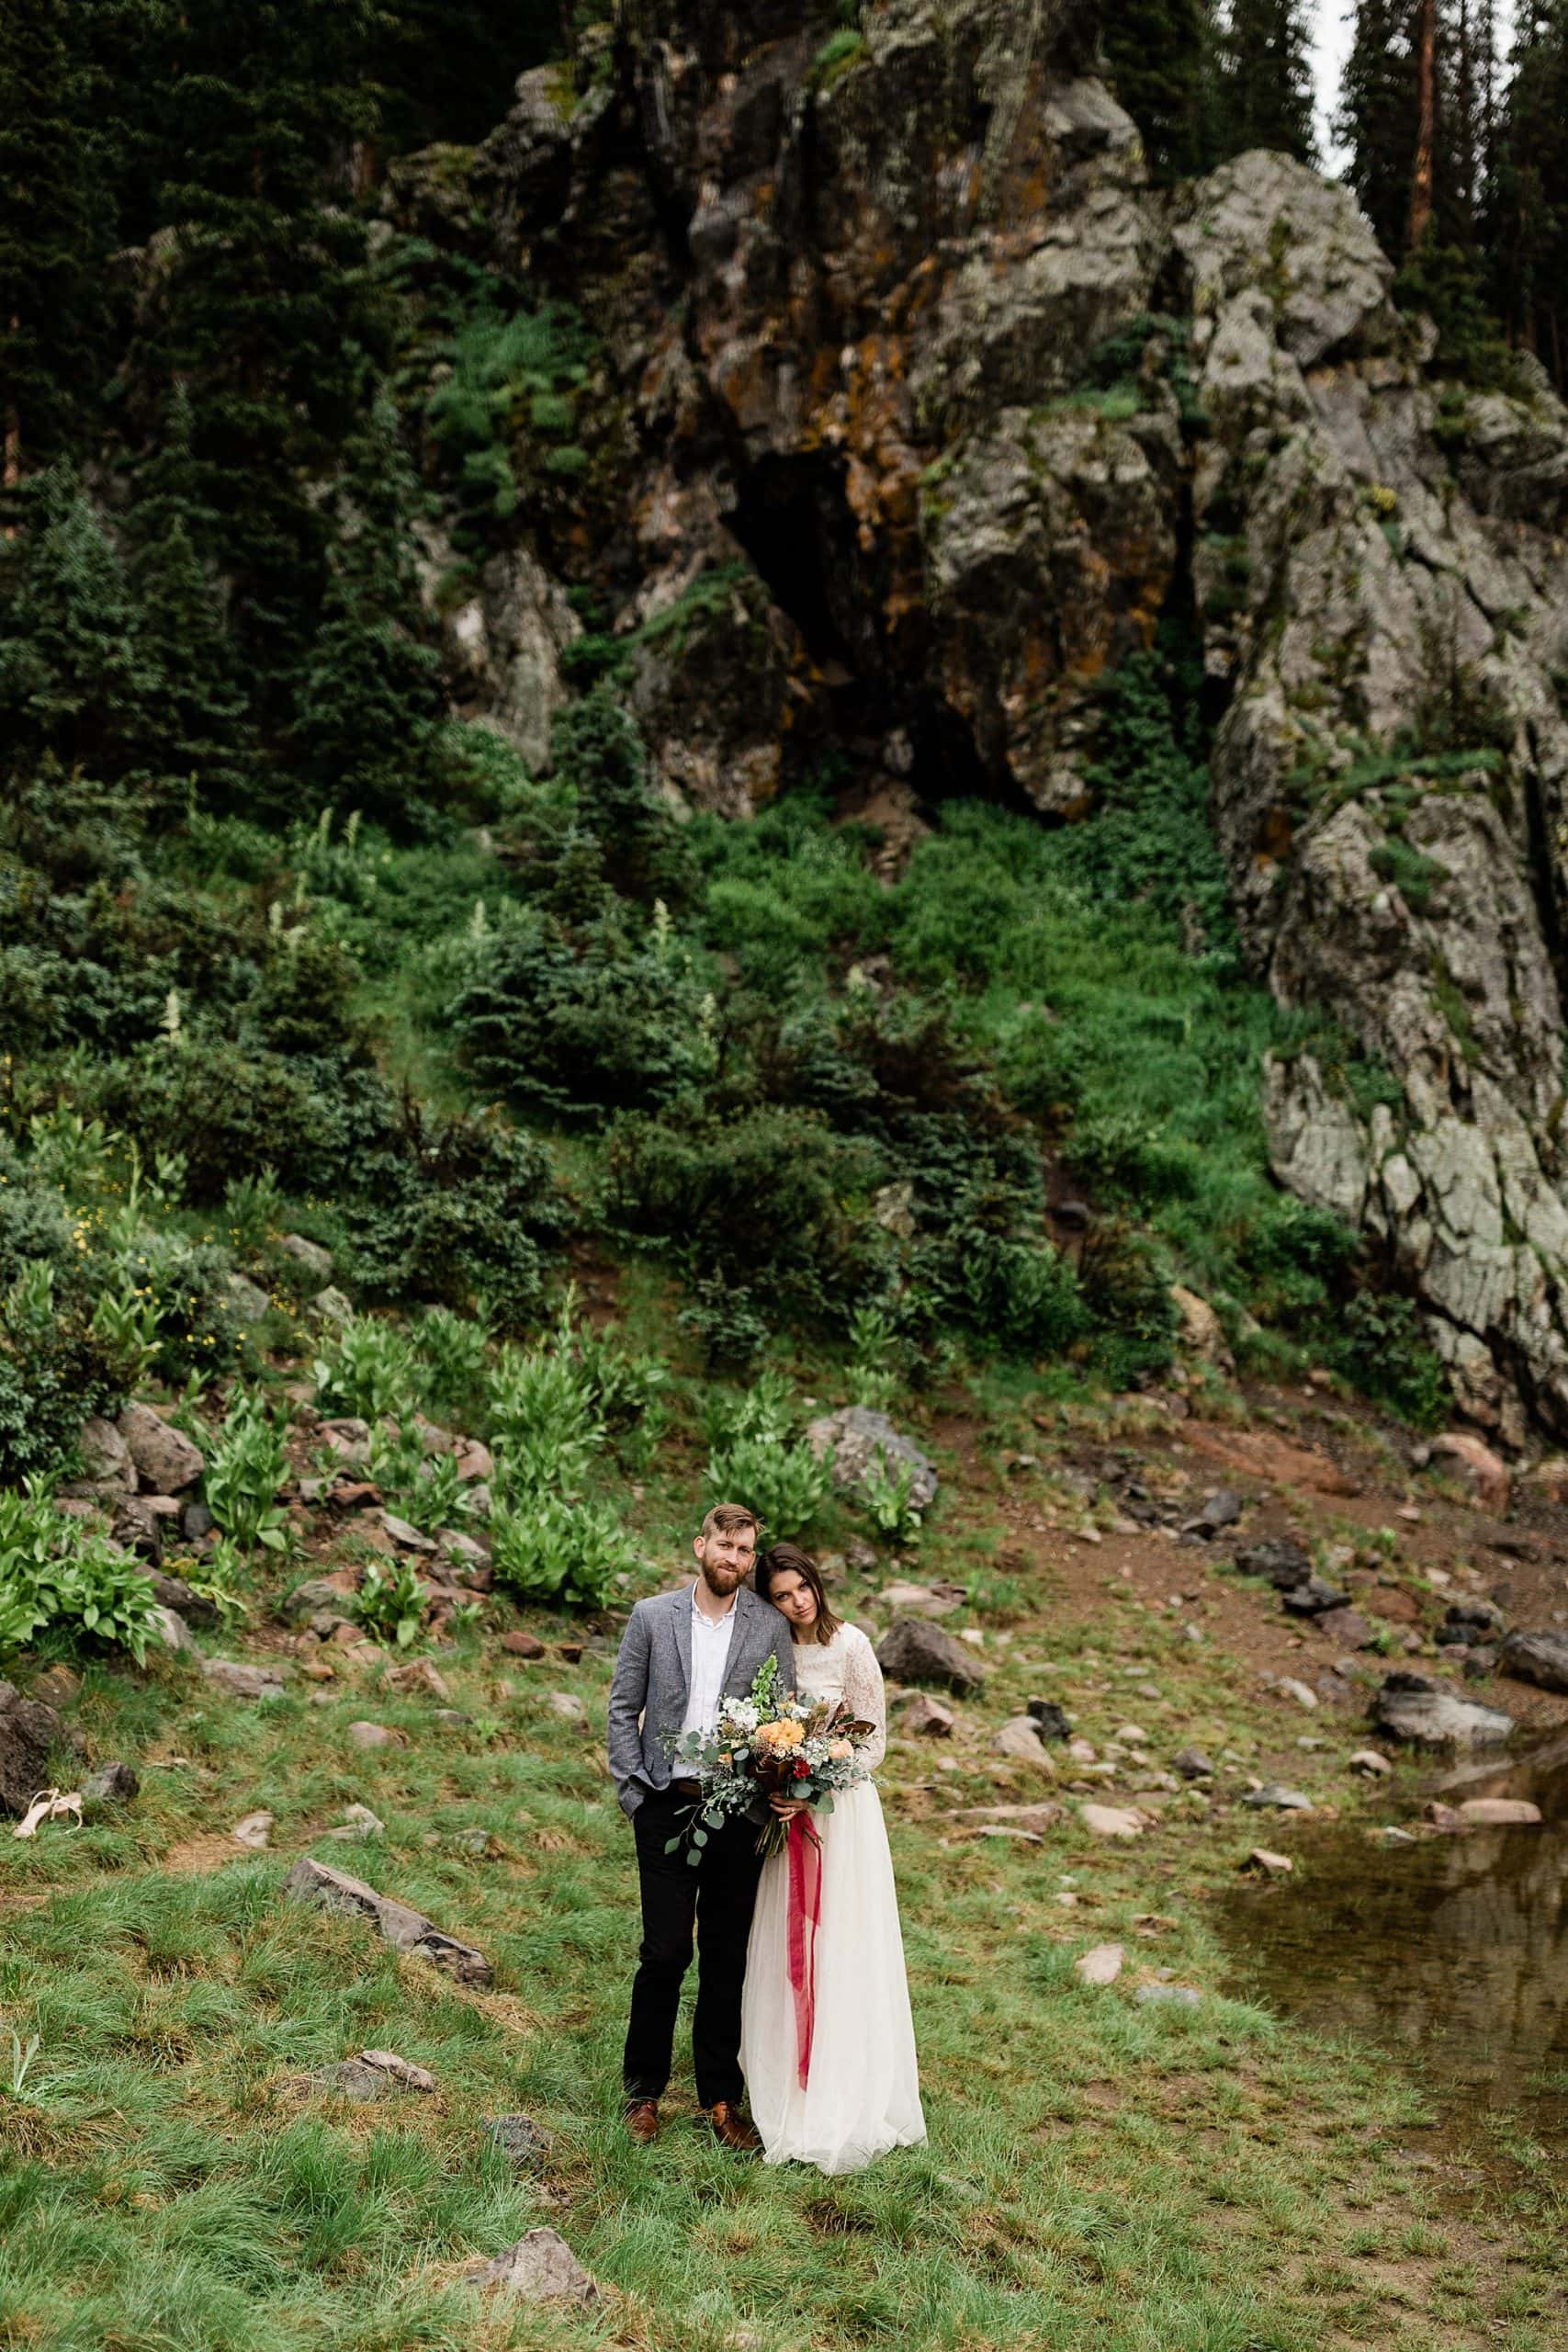 A bride rests her head on her groom in the mountains of Taos